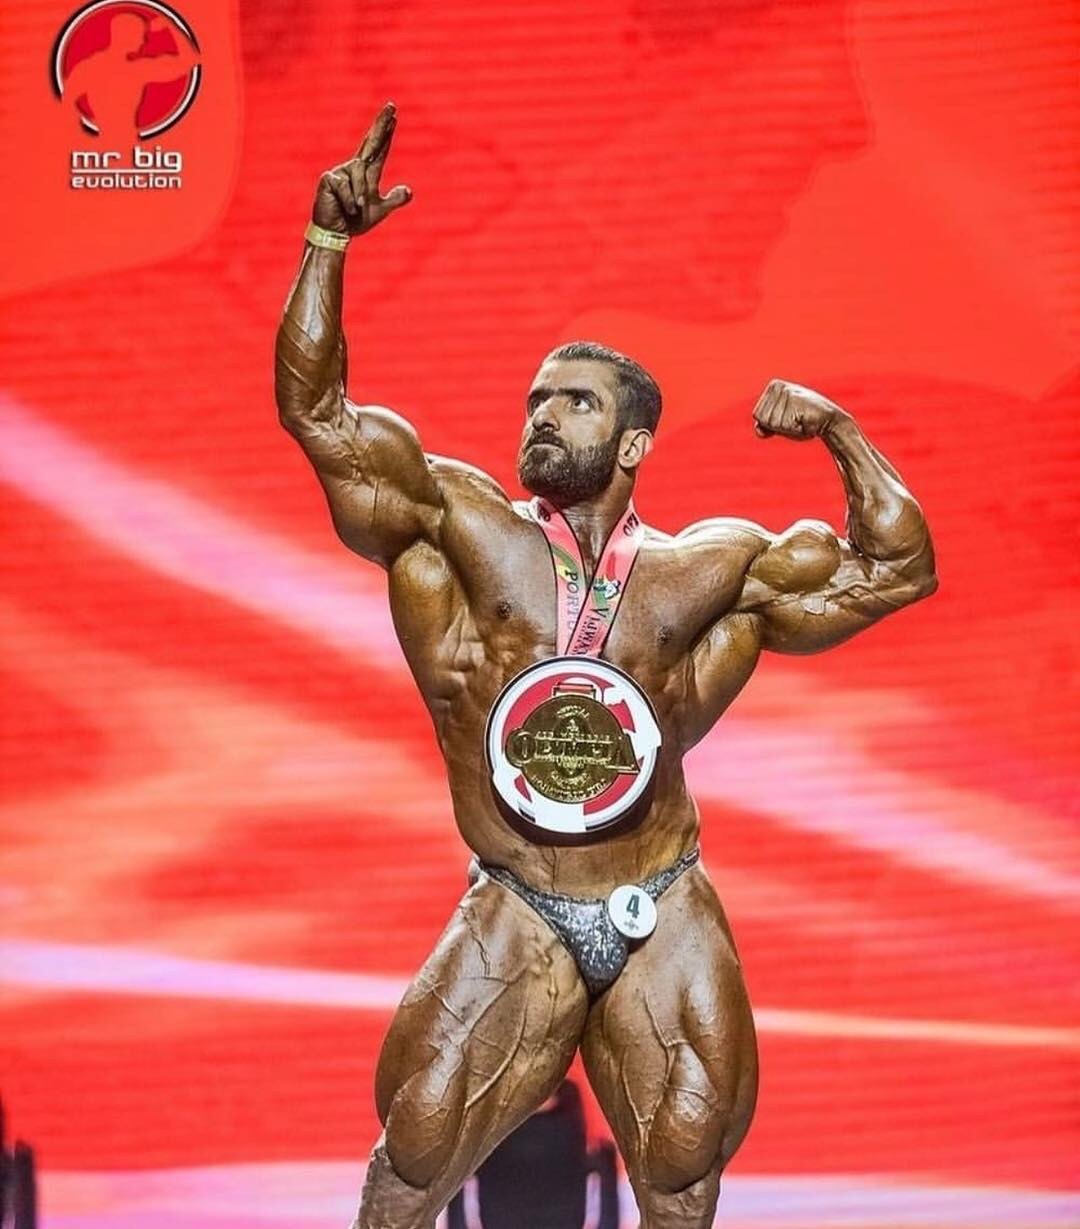 Hadi Choopan - 1st place winner of the 212lbs class at the 2018 Portugal Pro.